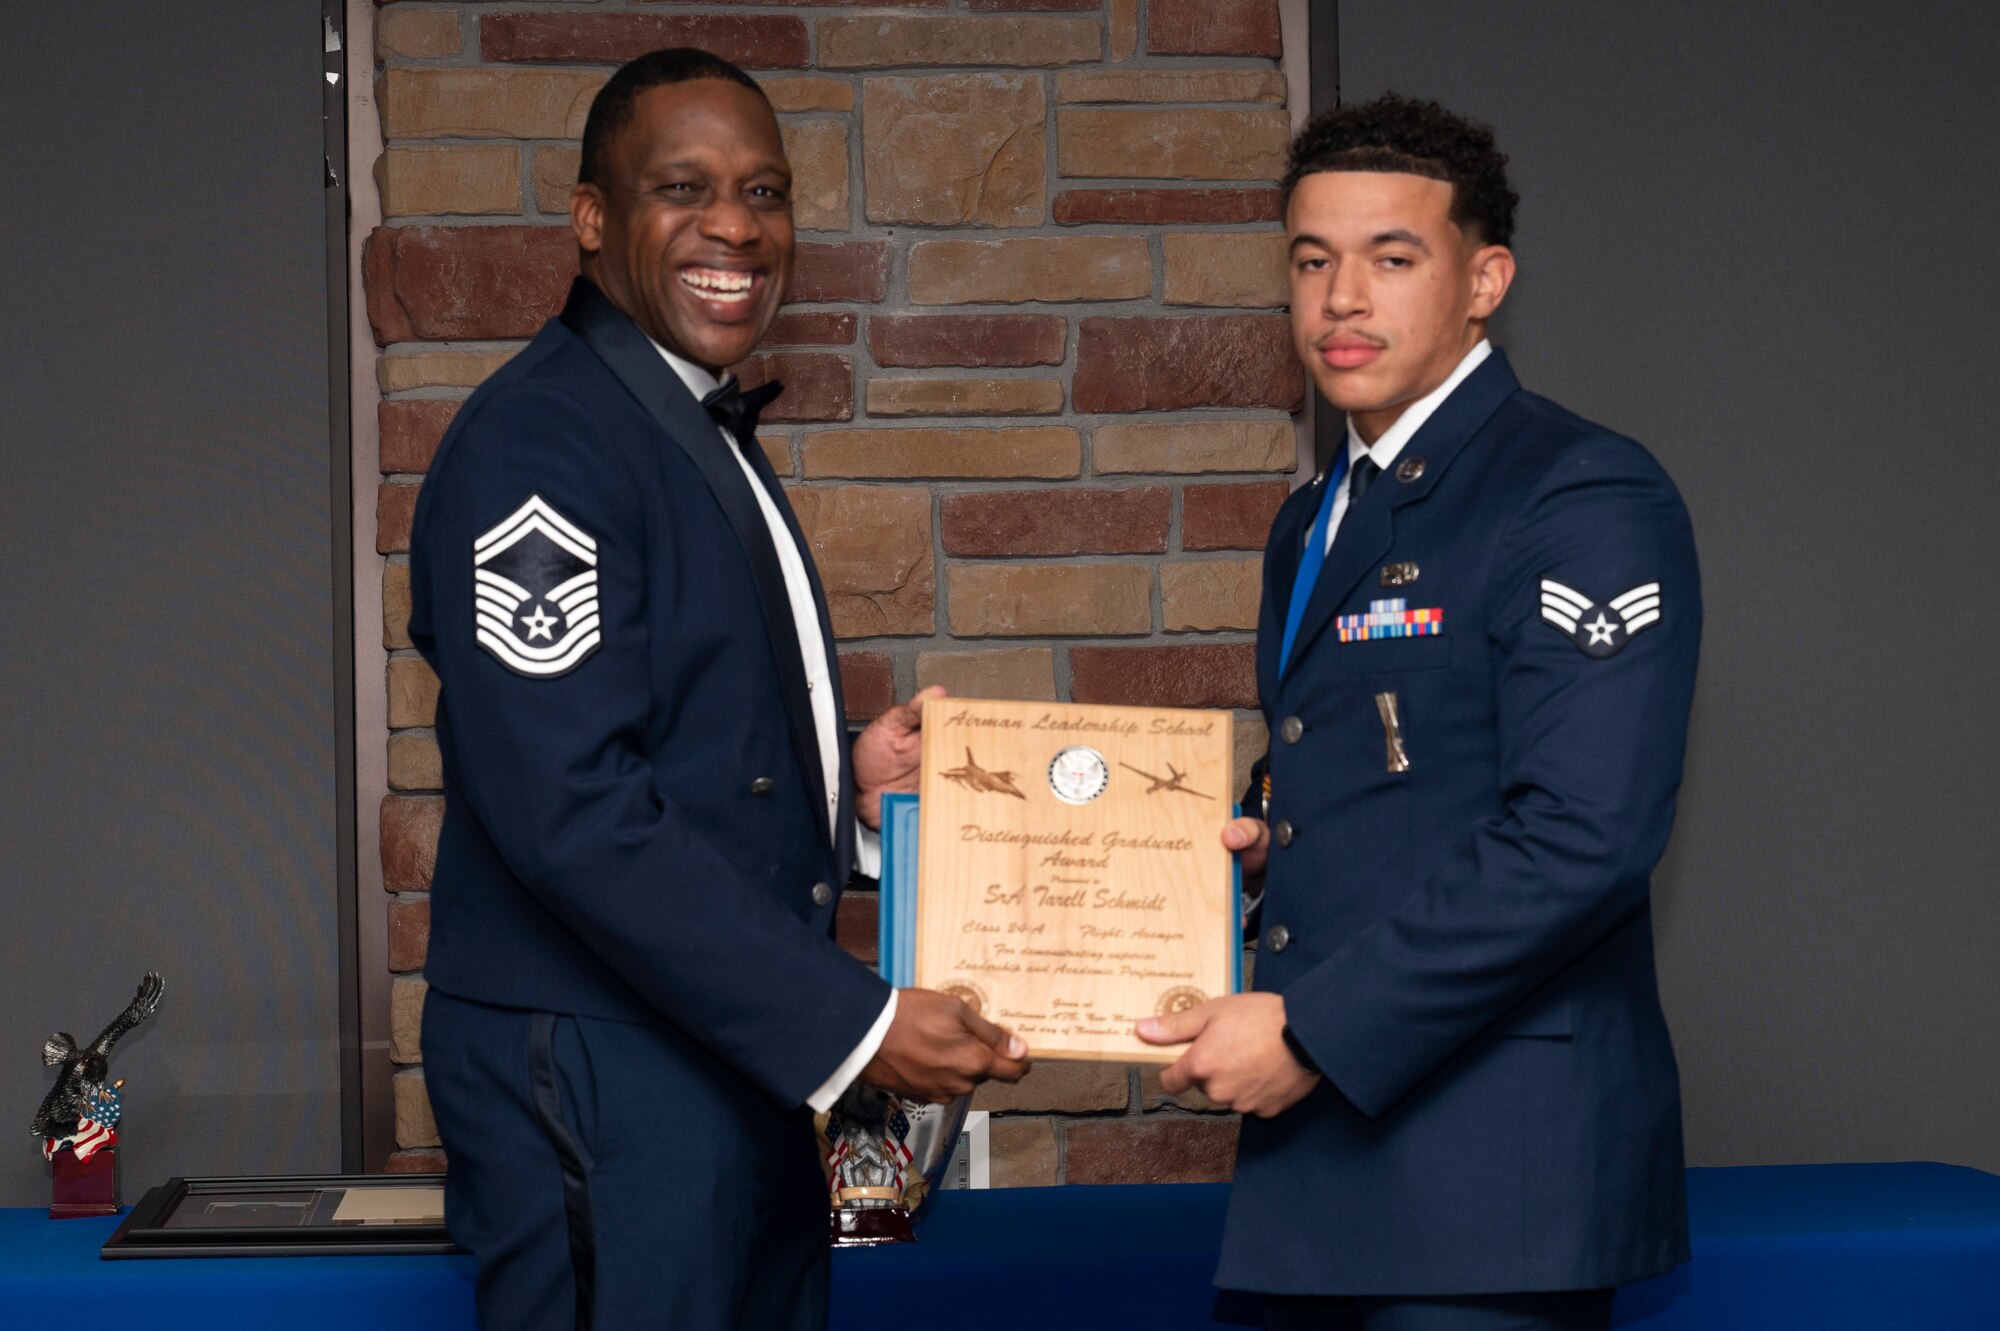 U.S. Air Force Senior Airman Tarell Schmidt right, Airman Leadership Graduate, accepts the Distinguished Graduate Award from Holloman Top III representative Senior Master Sgt. Rodney Dunn during the graduation of Joel C. Mayo ALS Class 24-A at Holloman Air Force Base, New Mexico, Nov. 2, 2023. The distinguished graduate award is presented to the top 10% of graduates for their performance in academic evaluations and demonstration of leadership. (U.S. Air Force photo by Airman 1st Class Michelle Ferrari)